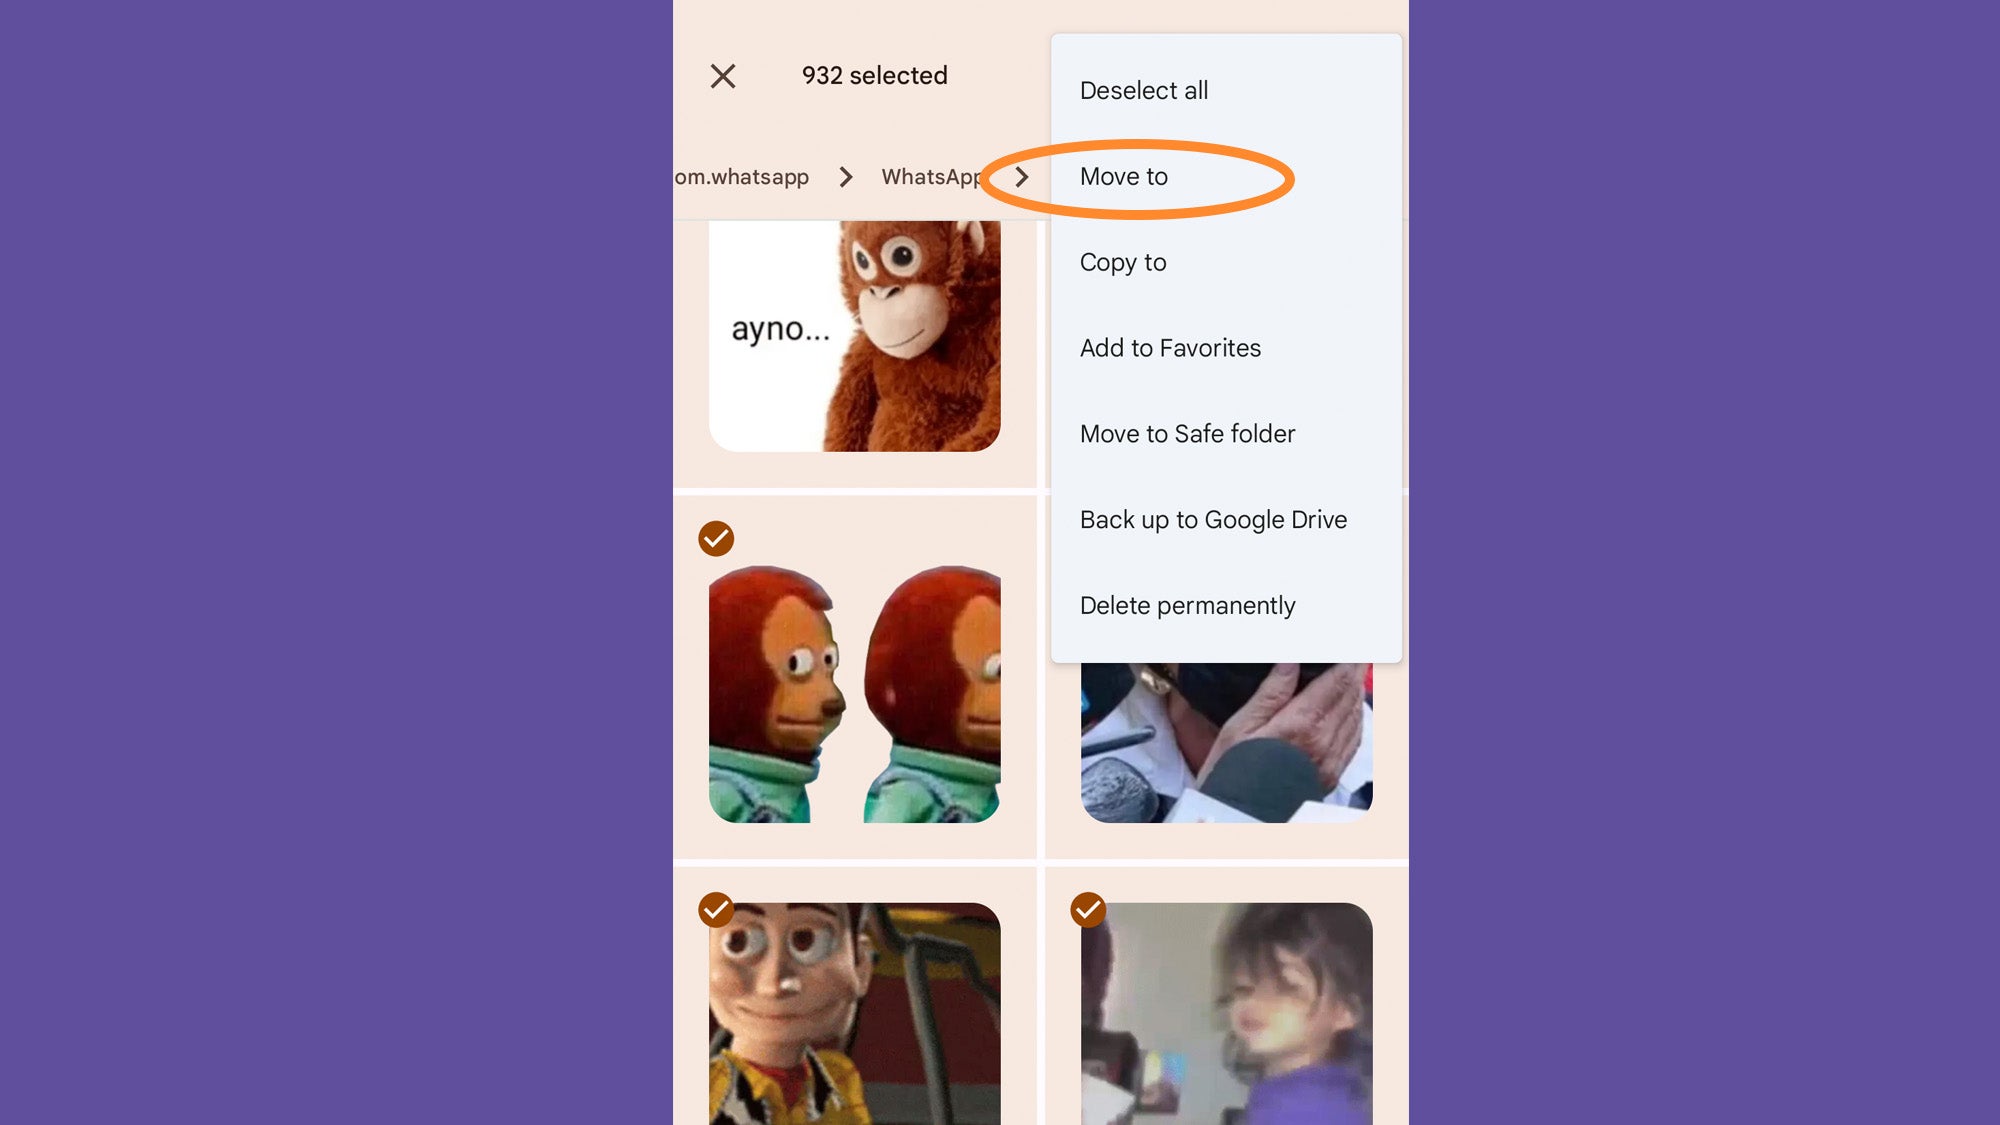 Menu showing how to move WhatsApp stickers to a new folder.